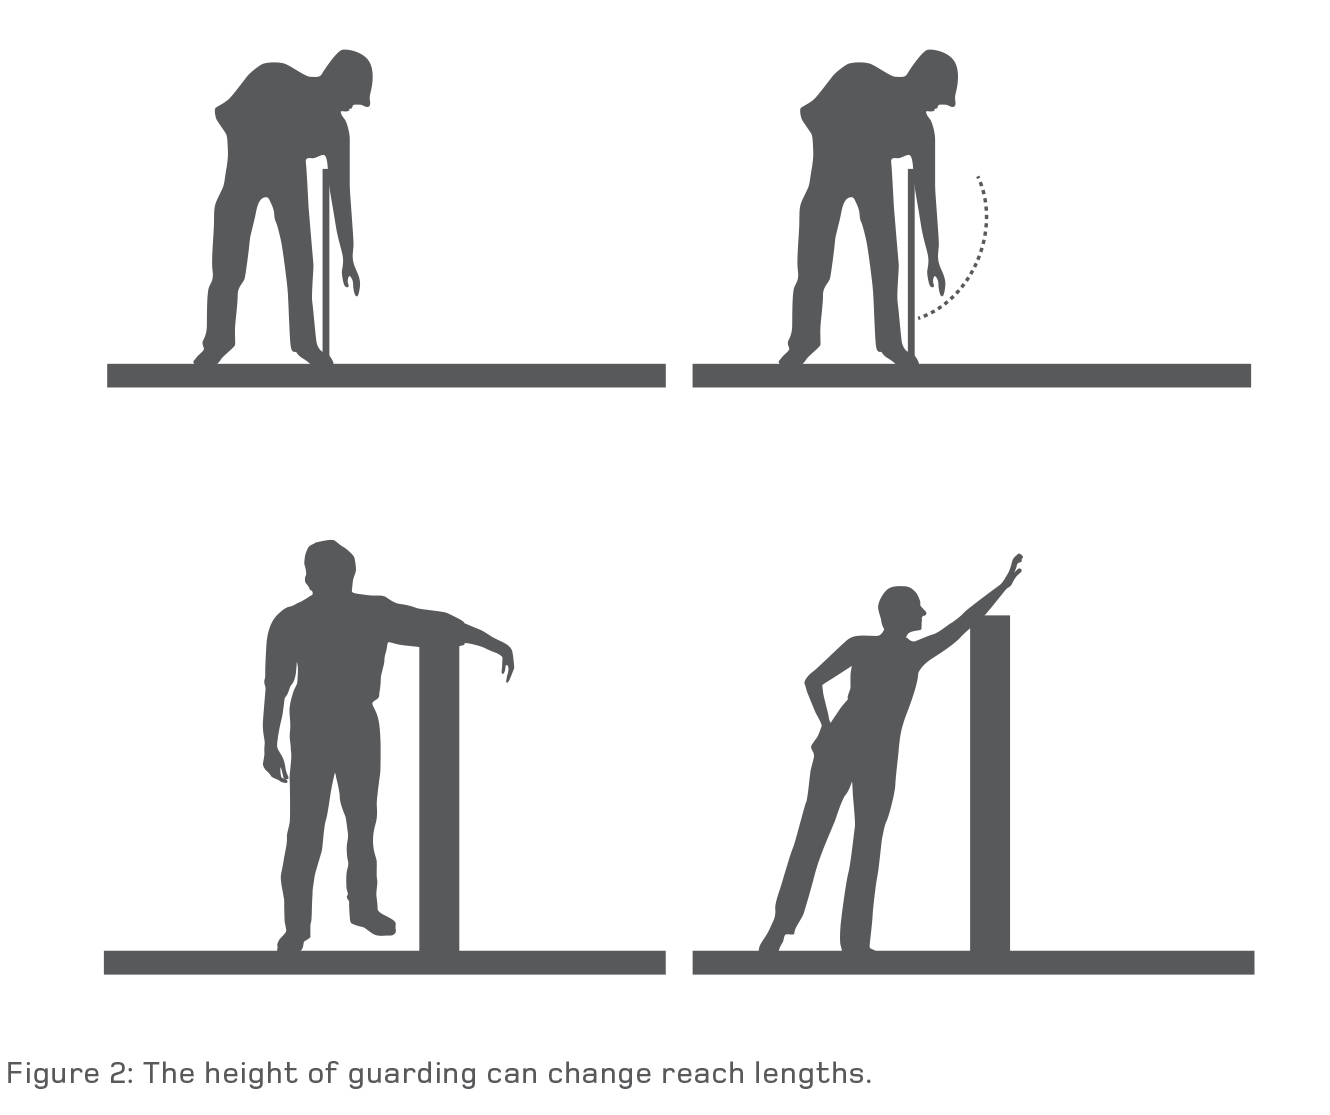 [image] Figure 2: the height of guarding can change reach lengths